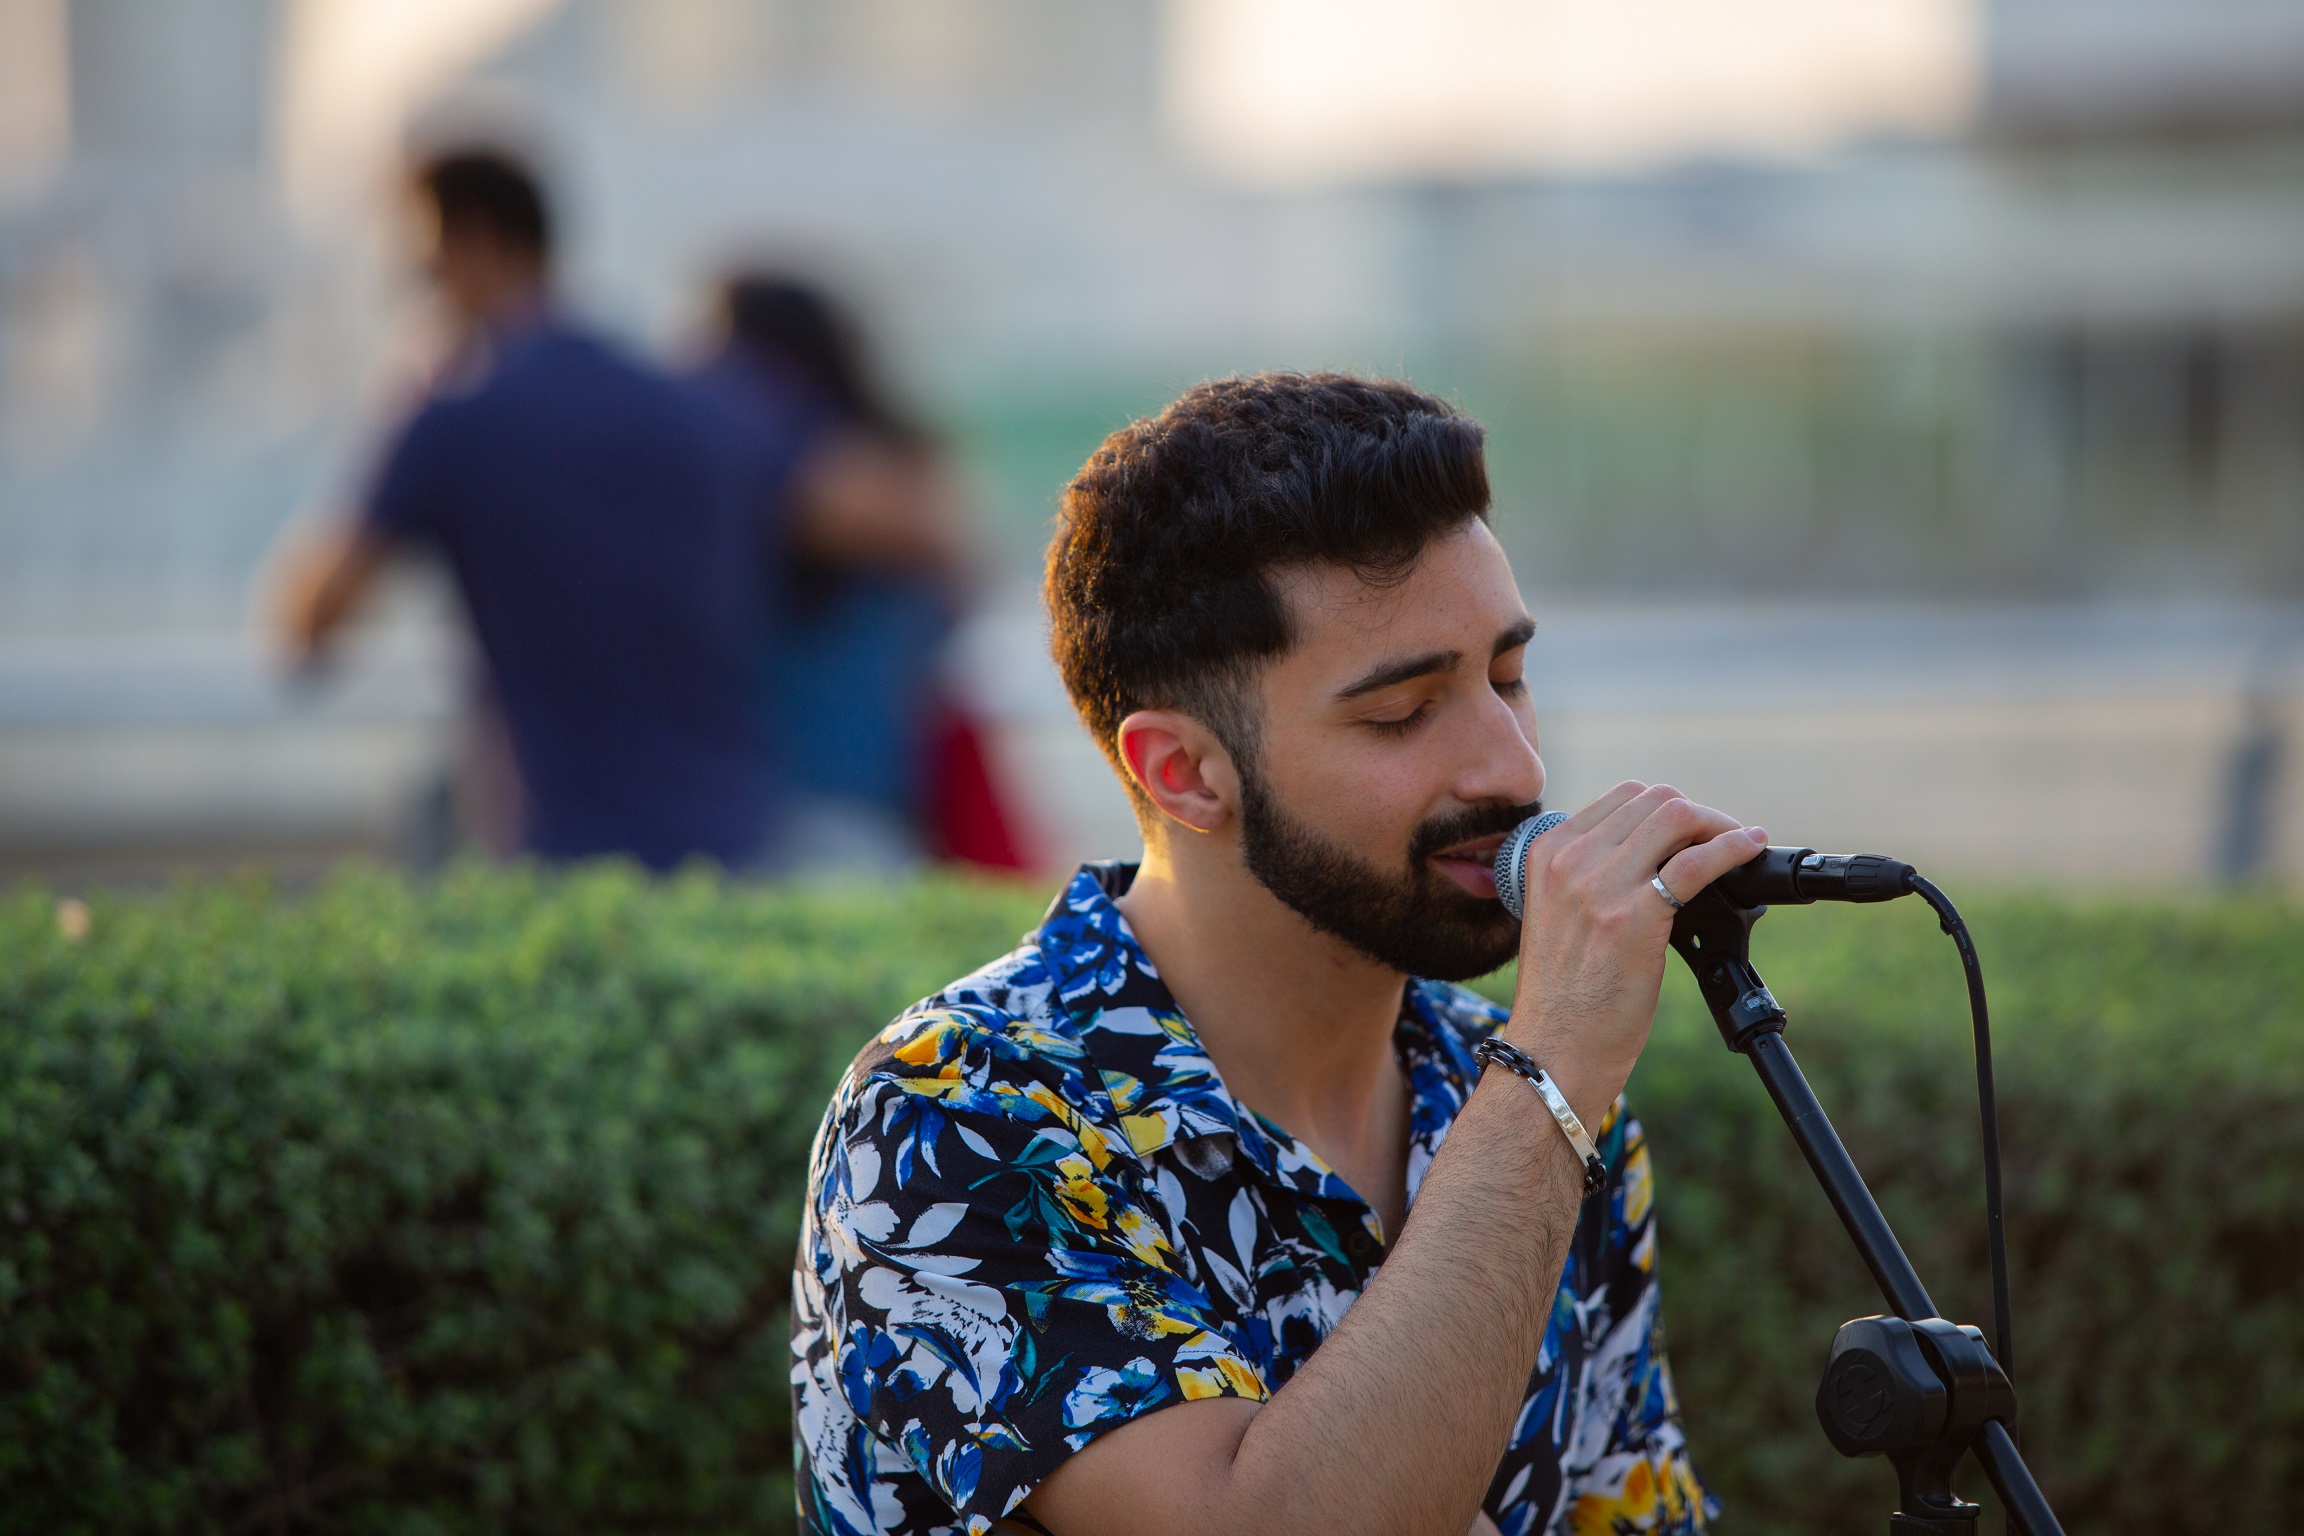 Music At The Boardwalk Returns With 126 Live Performances Across Three Locations In Abu Dhabi